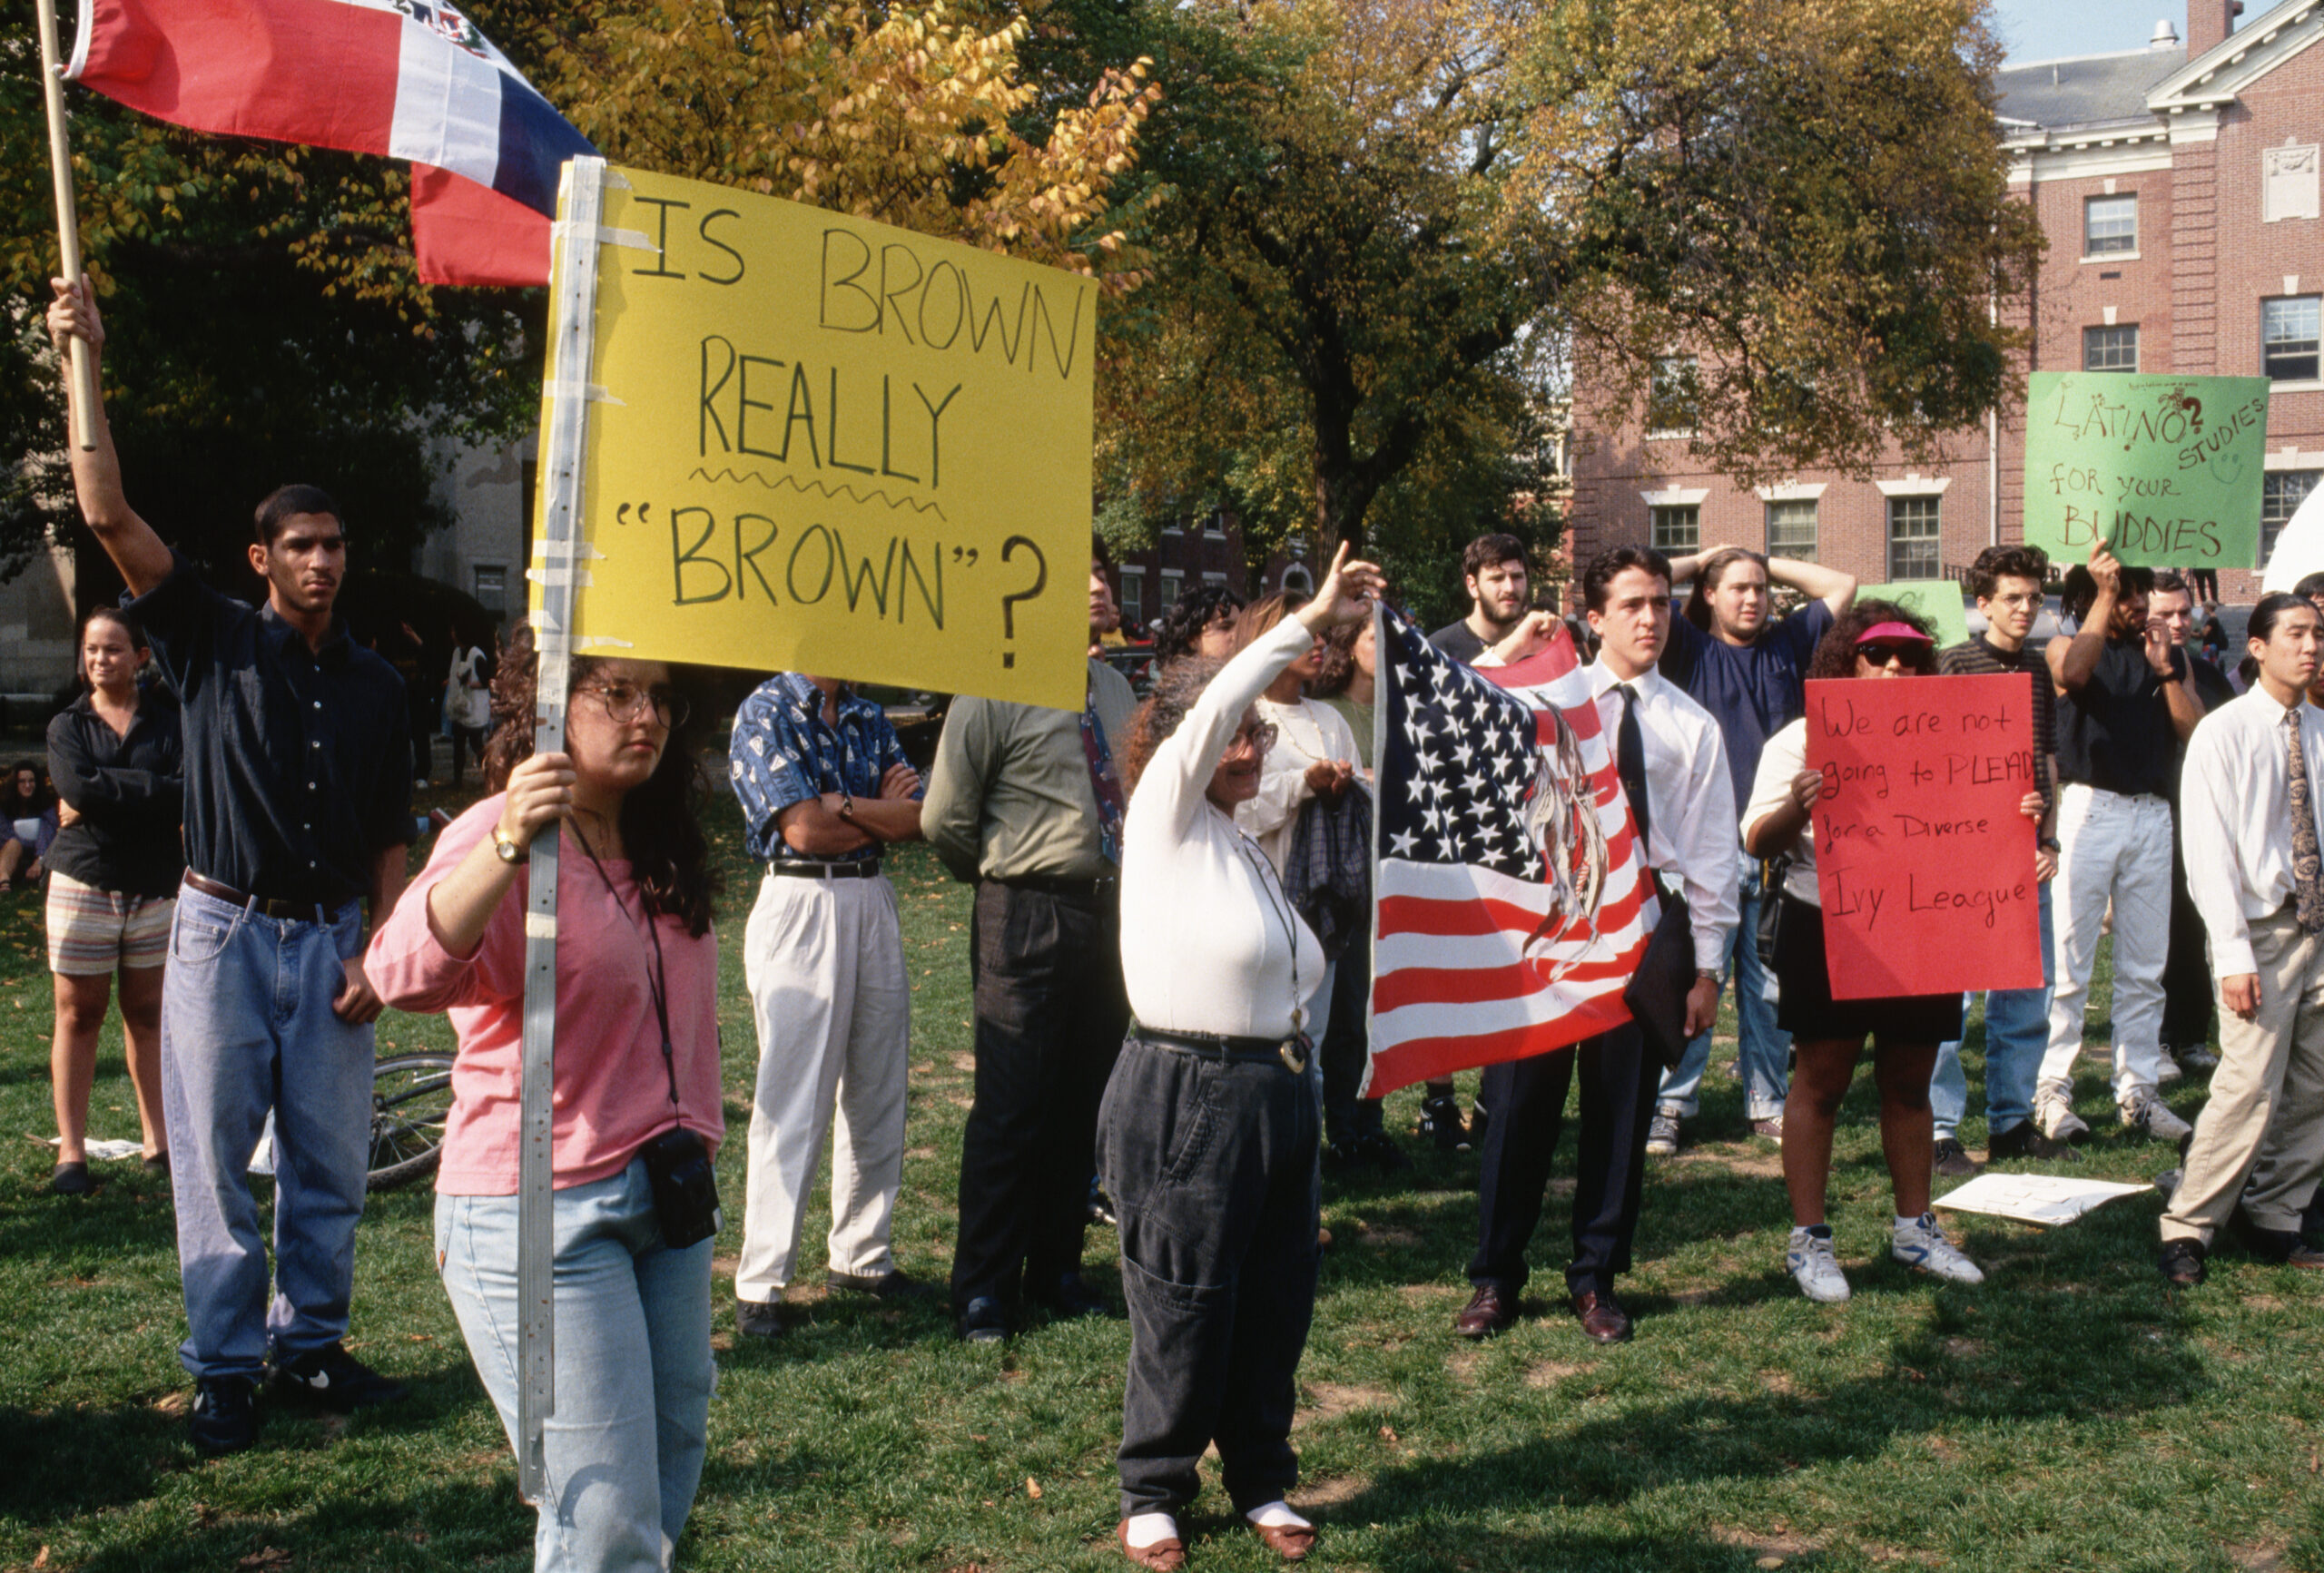 Student protesters at Brown University, Providence, Rhode Island (Lee Snider via Getty Images)